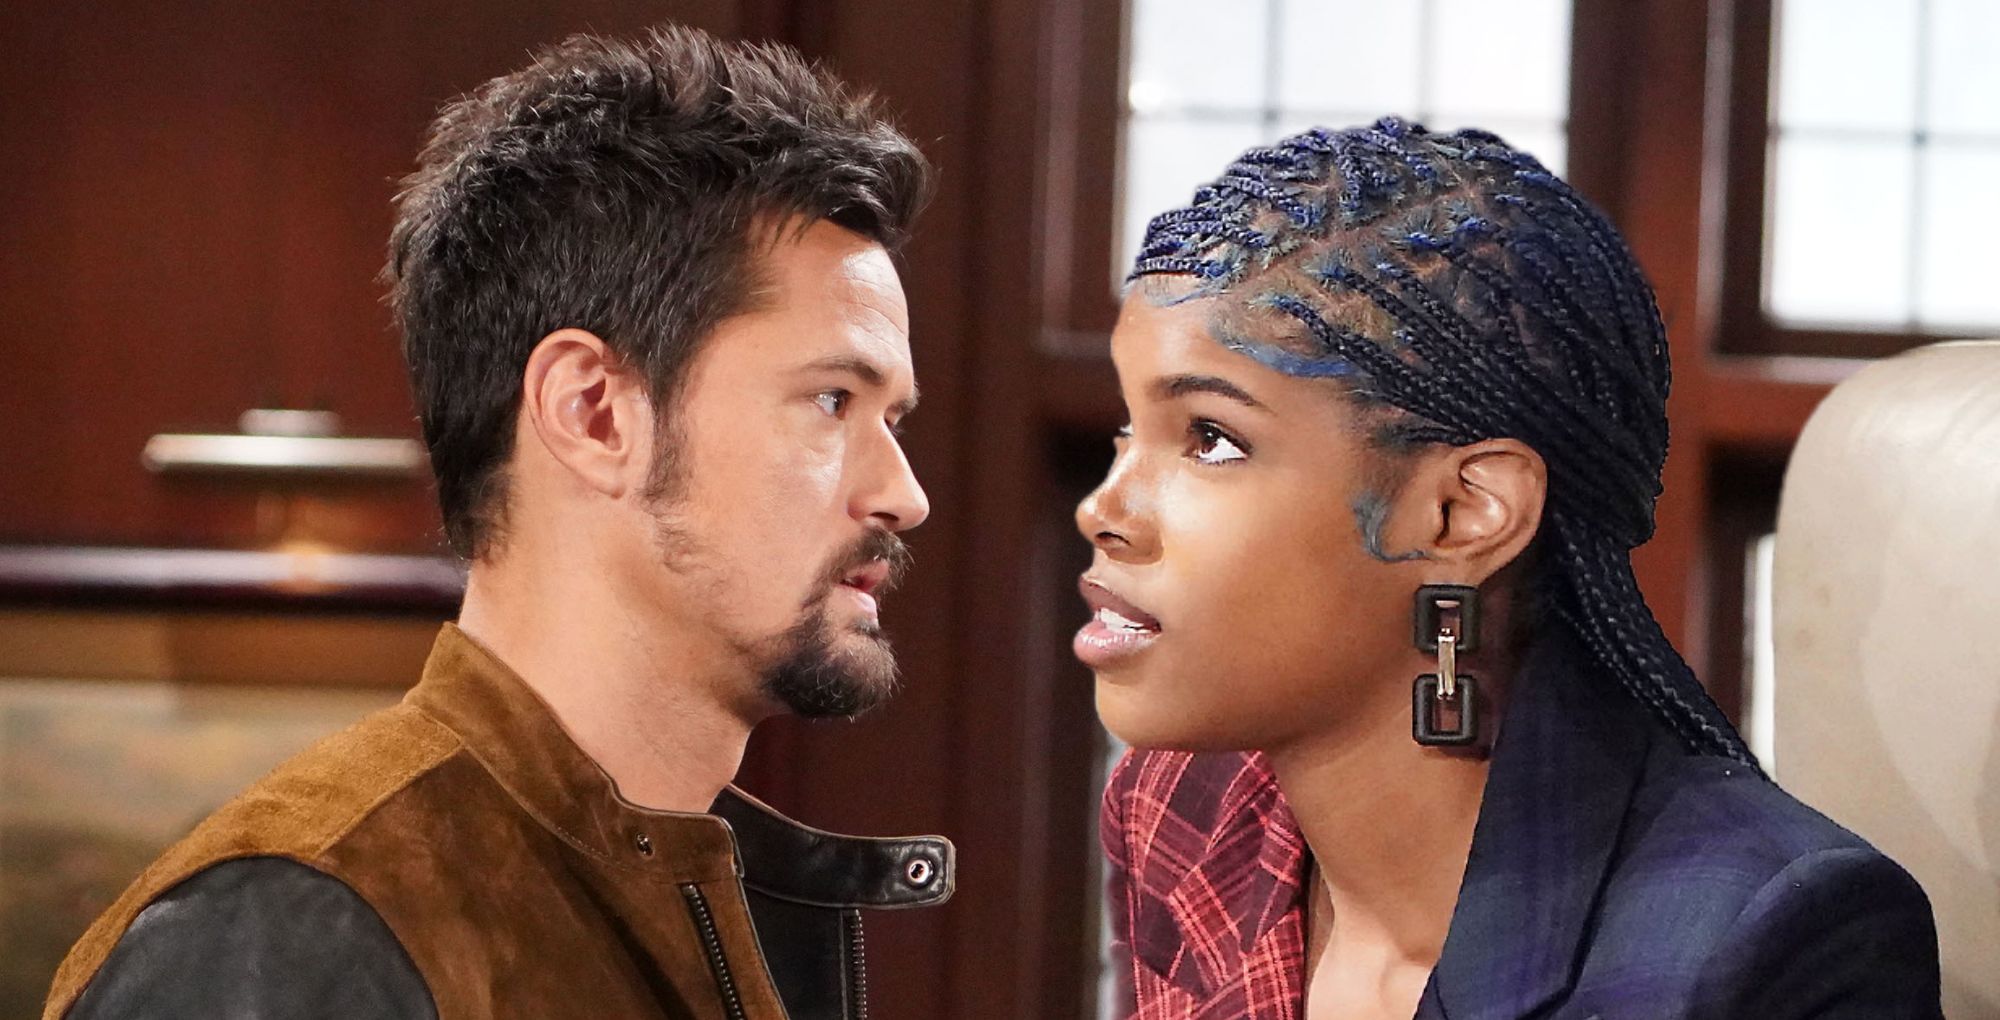 Will Thomas And Paris Fall For Each Other On The Bold and the Beautiful?